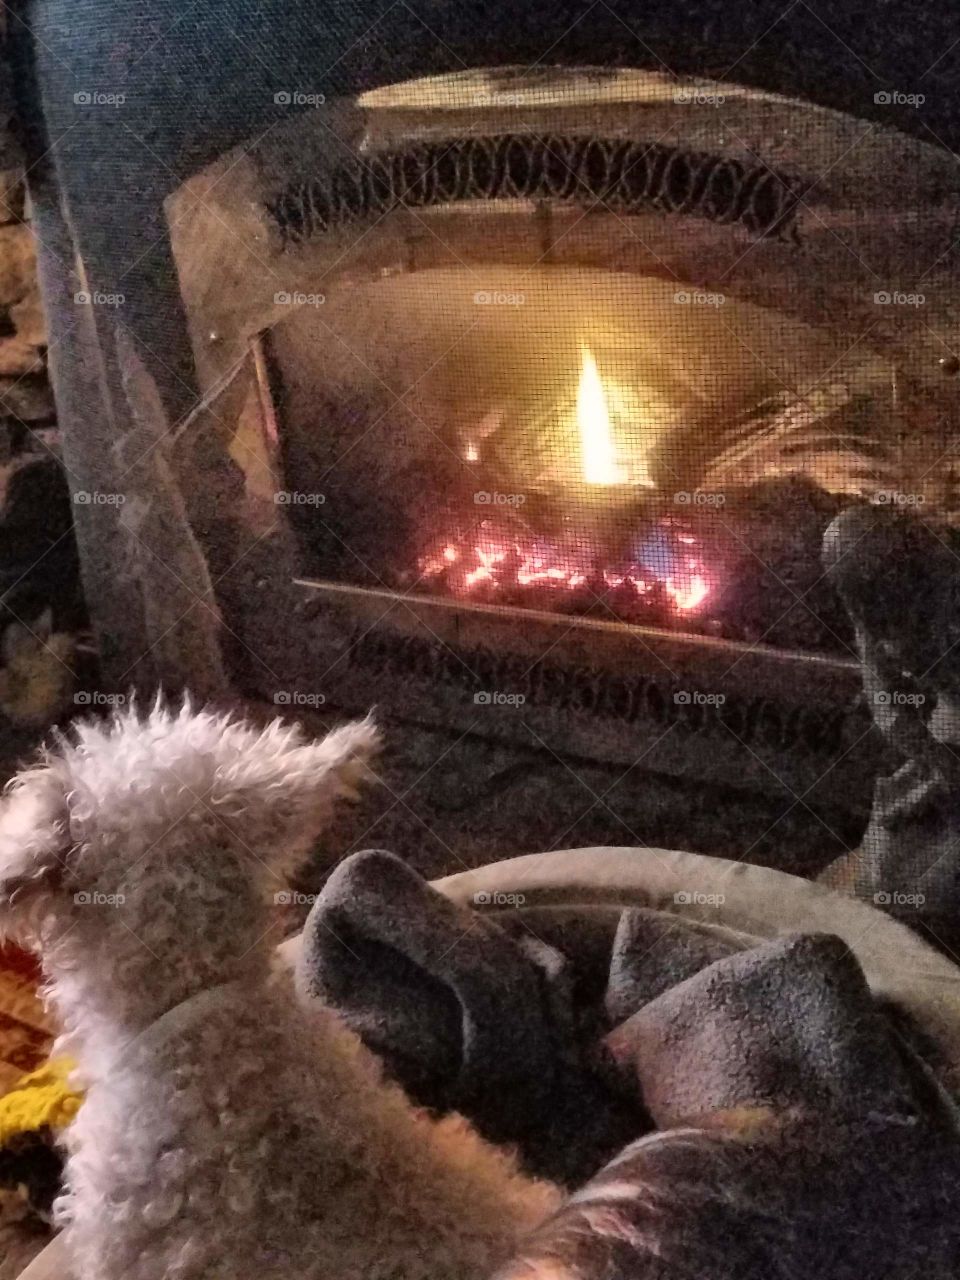 My poodle warming himself in his bed in front of fireplace fire.